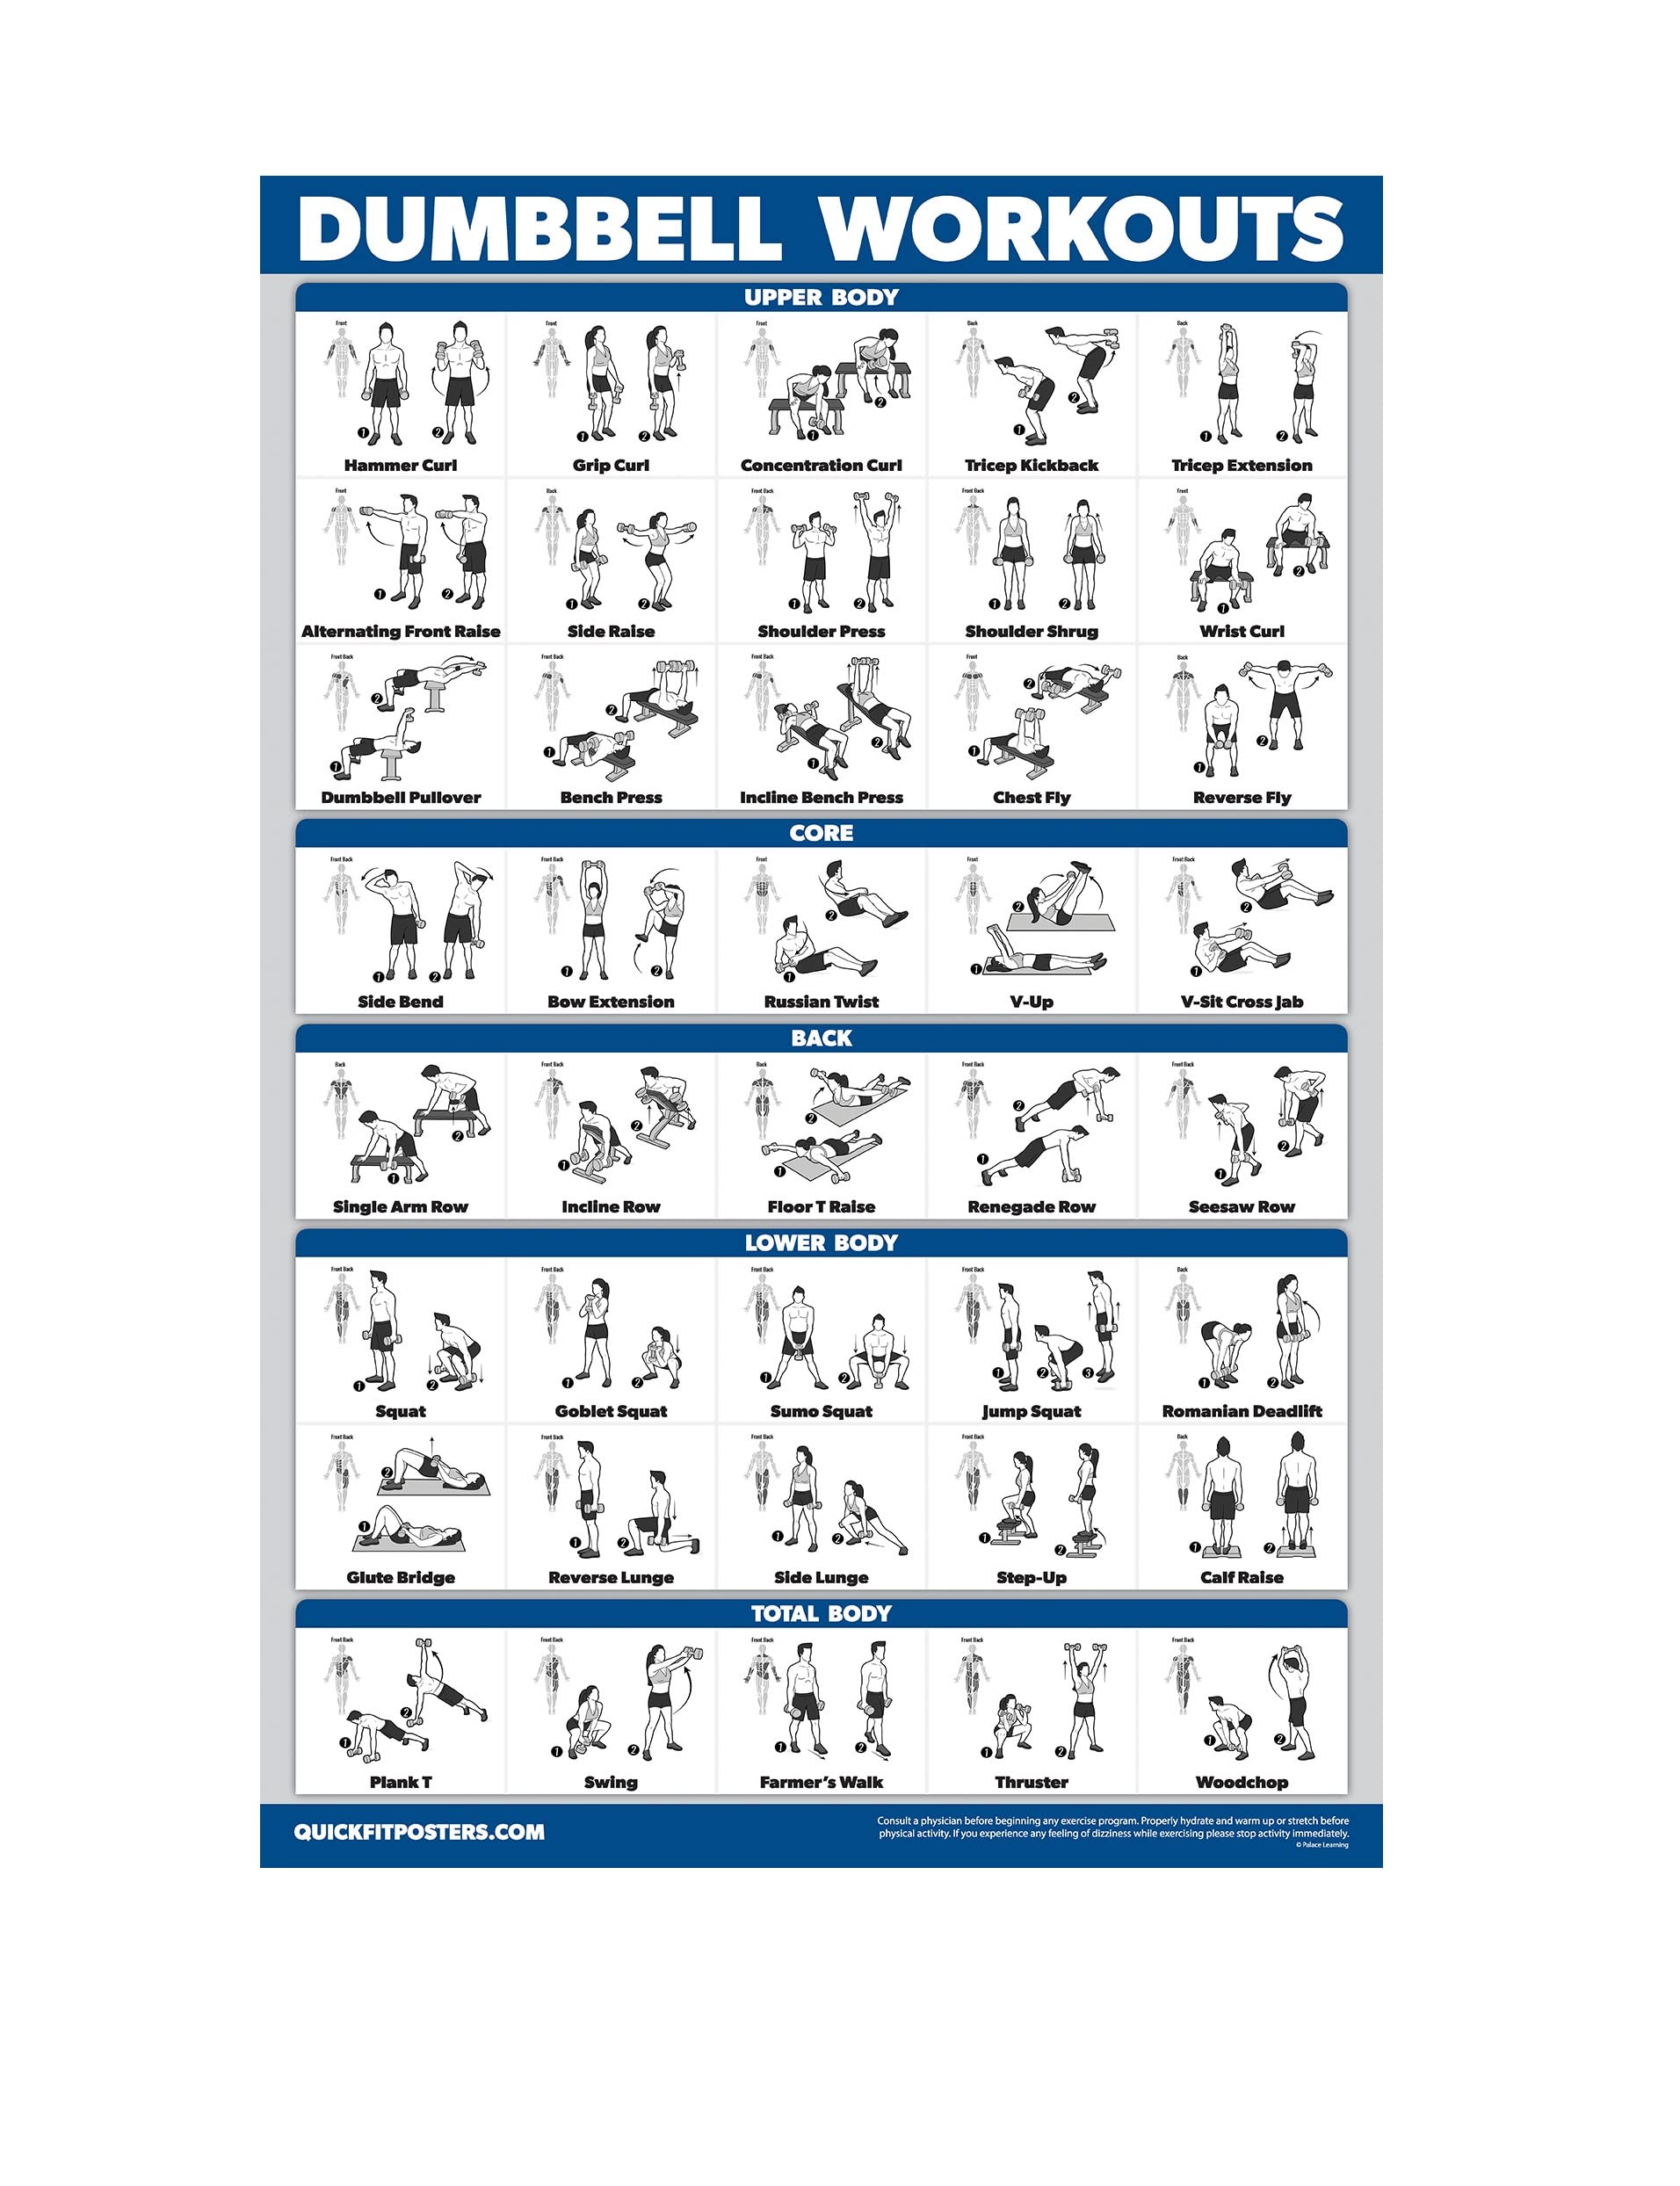 Palace Learning Dumbbell Workout Exercise Poster - Free Weight Body Building Guide | Home Gym Chart - LAMINATED, 18